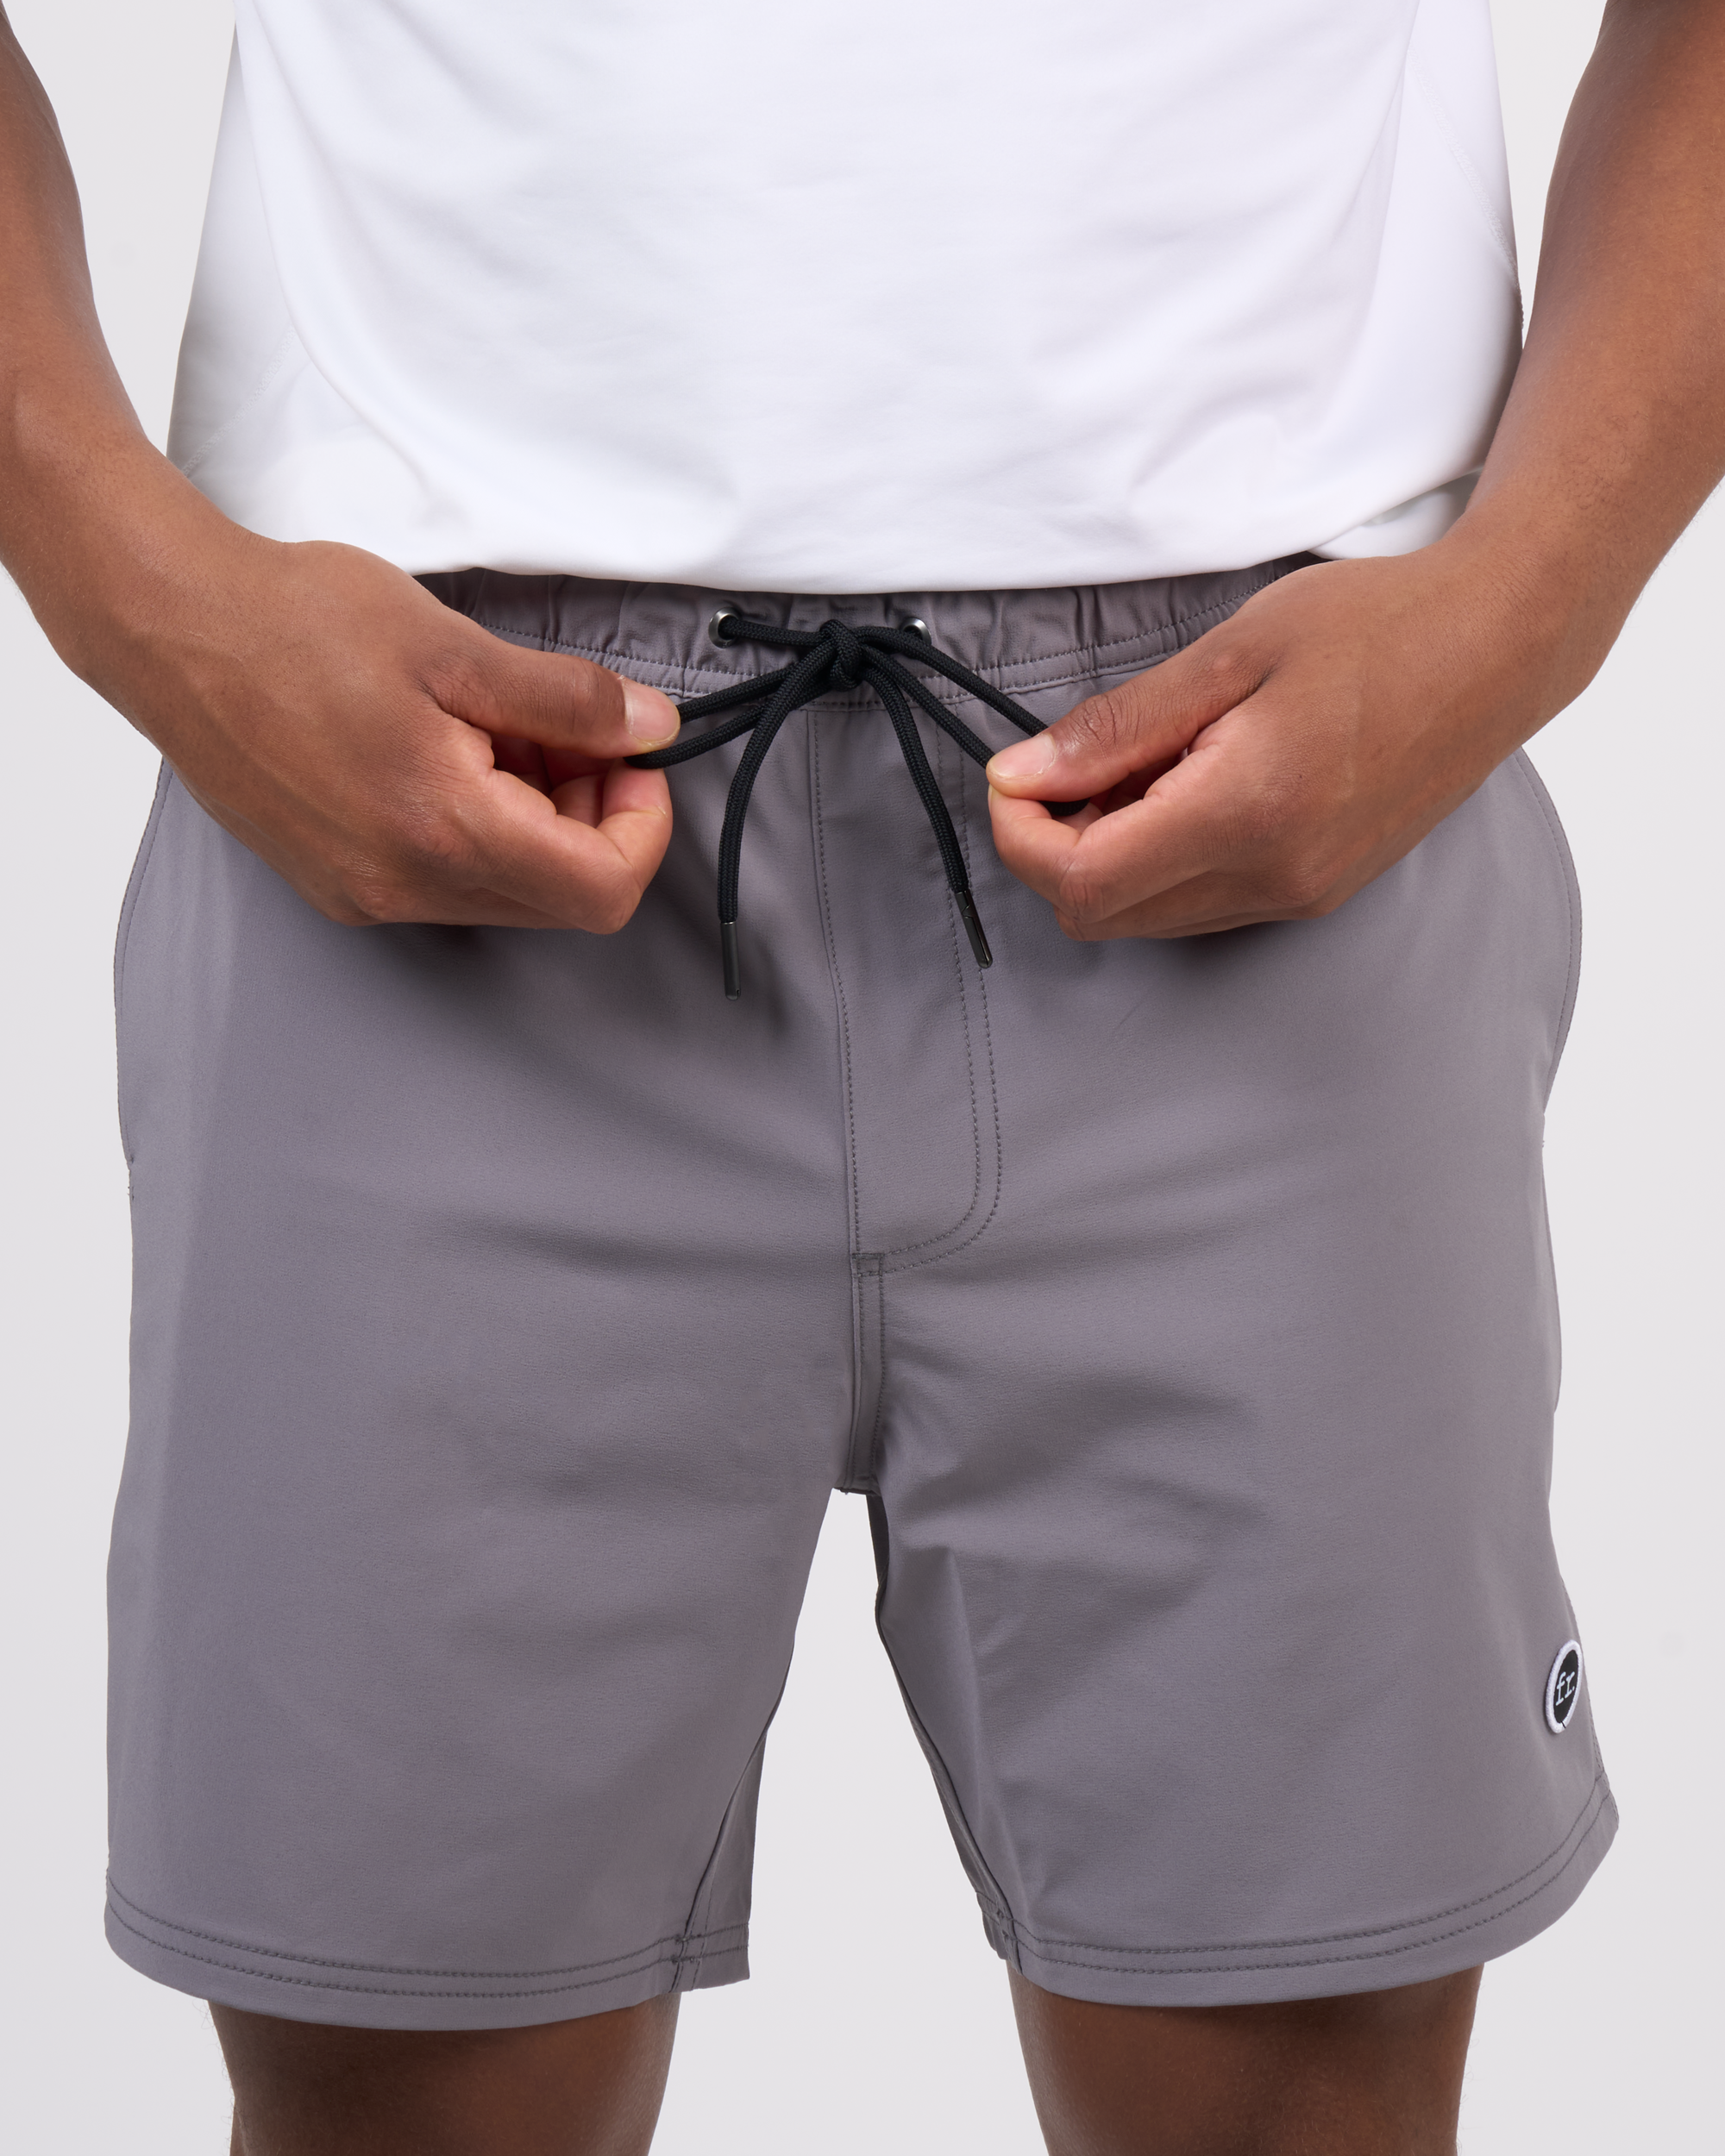 Foreign Rider Co Technical Fabric Grey Boardshorts Drawstring Detail